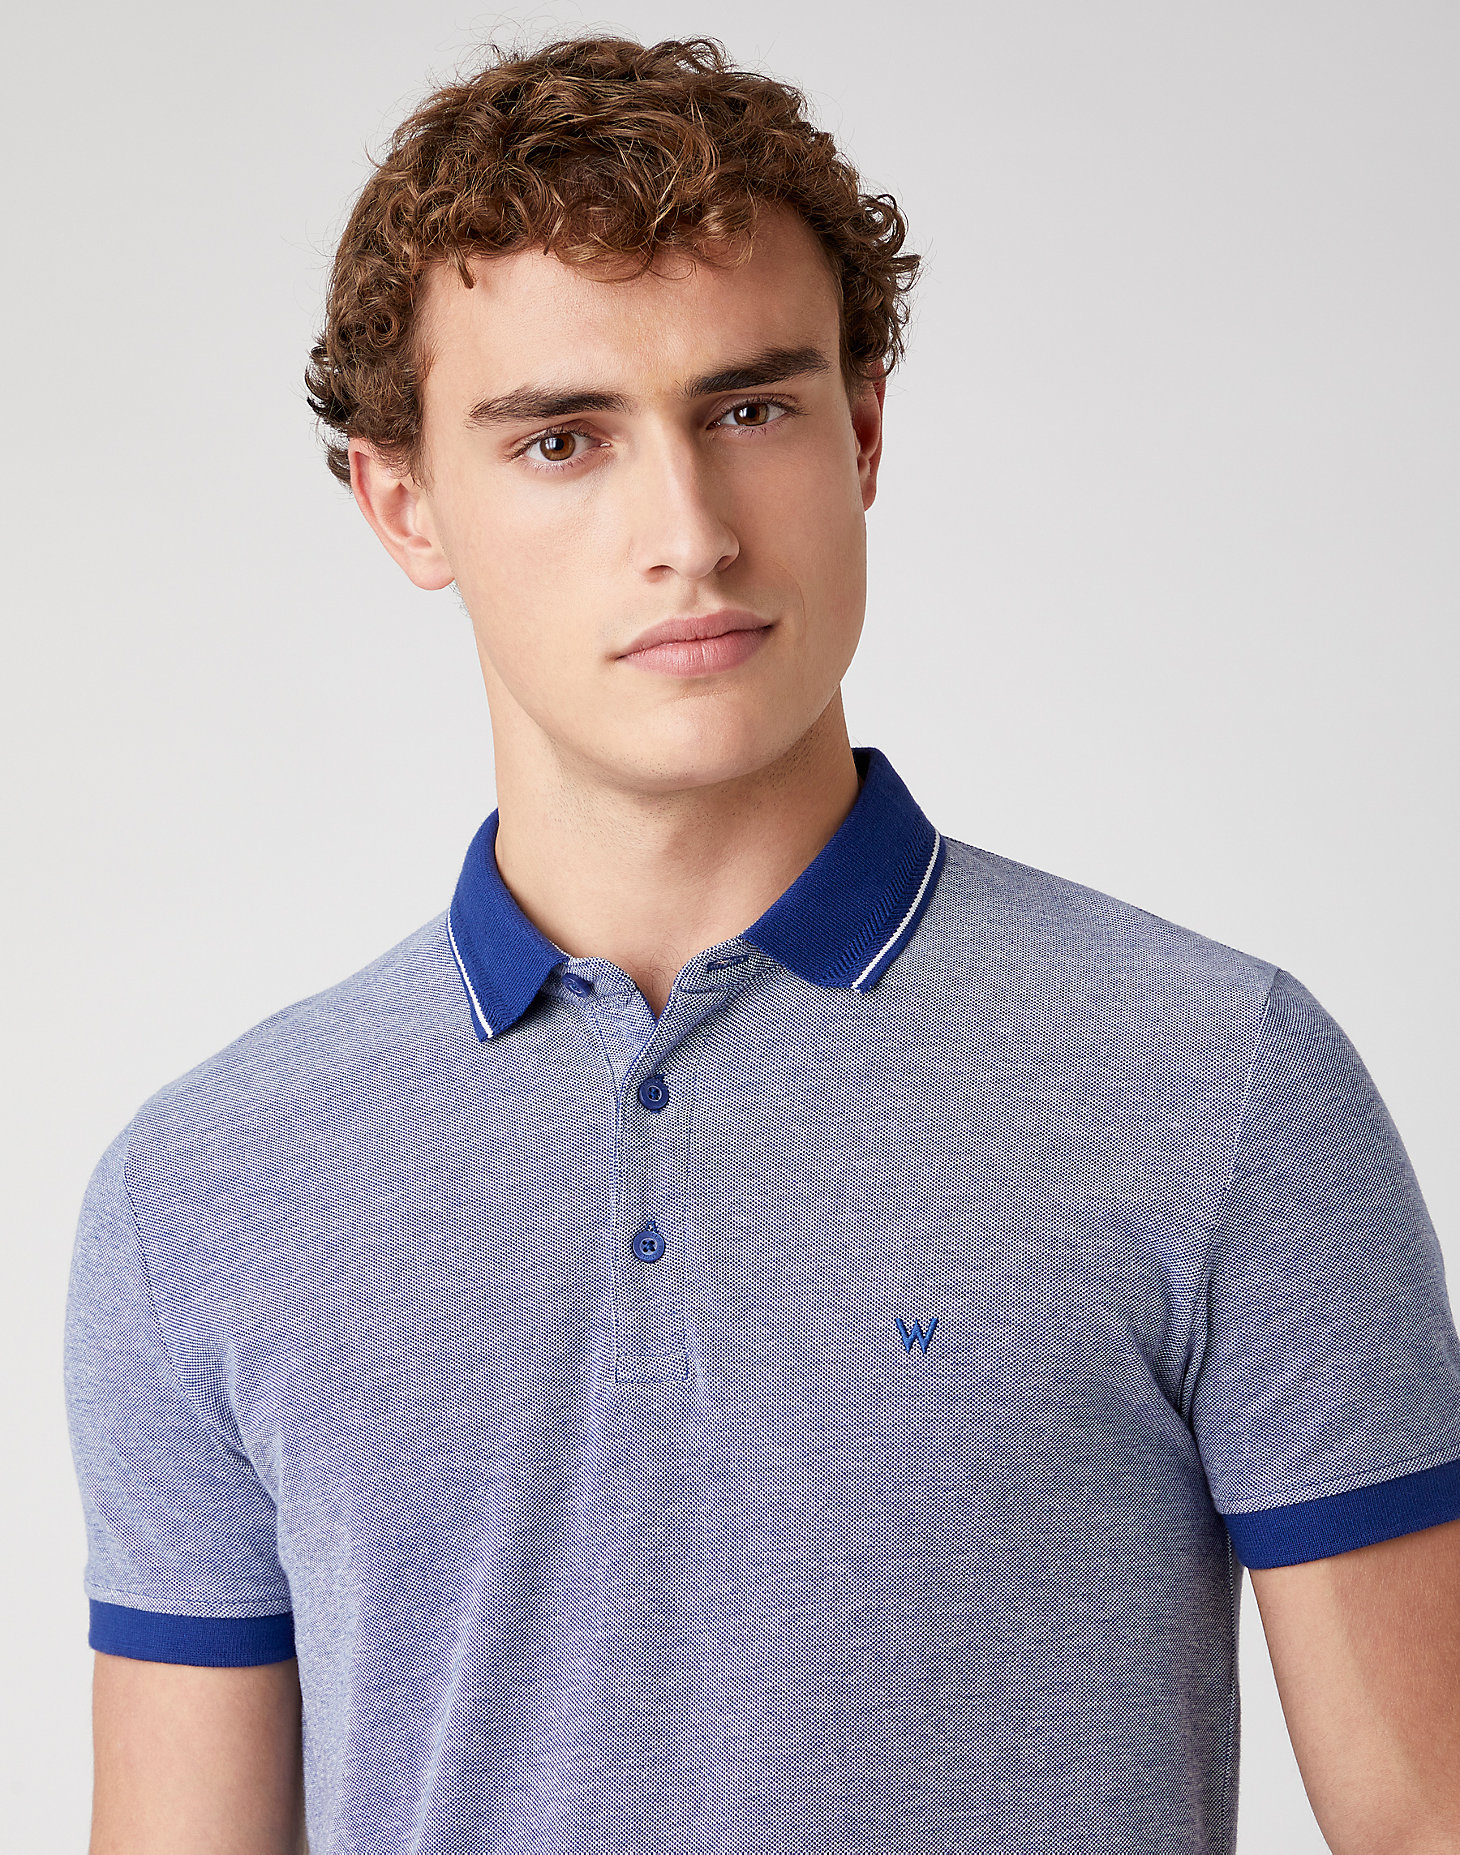 Short Sleeve Refined Polo in Twilight Blue 1 alternative view 3